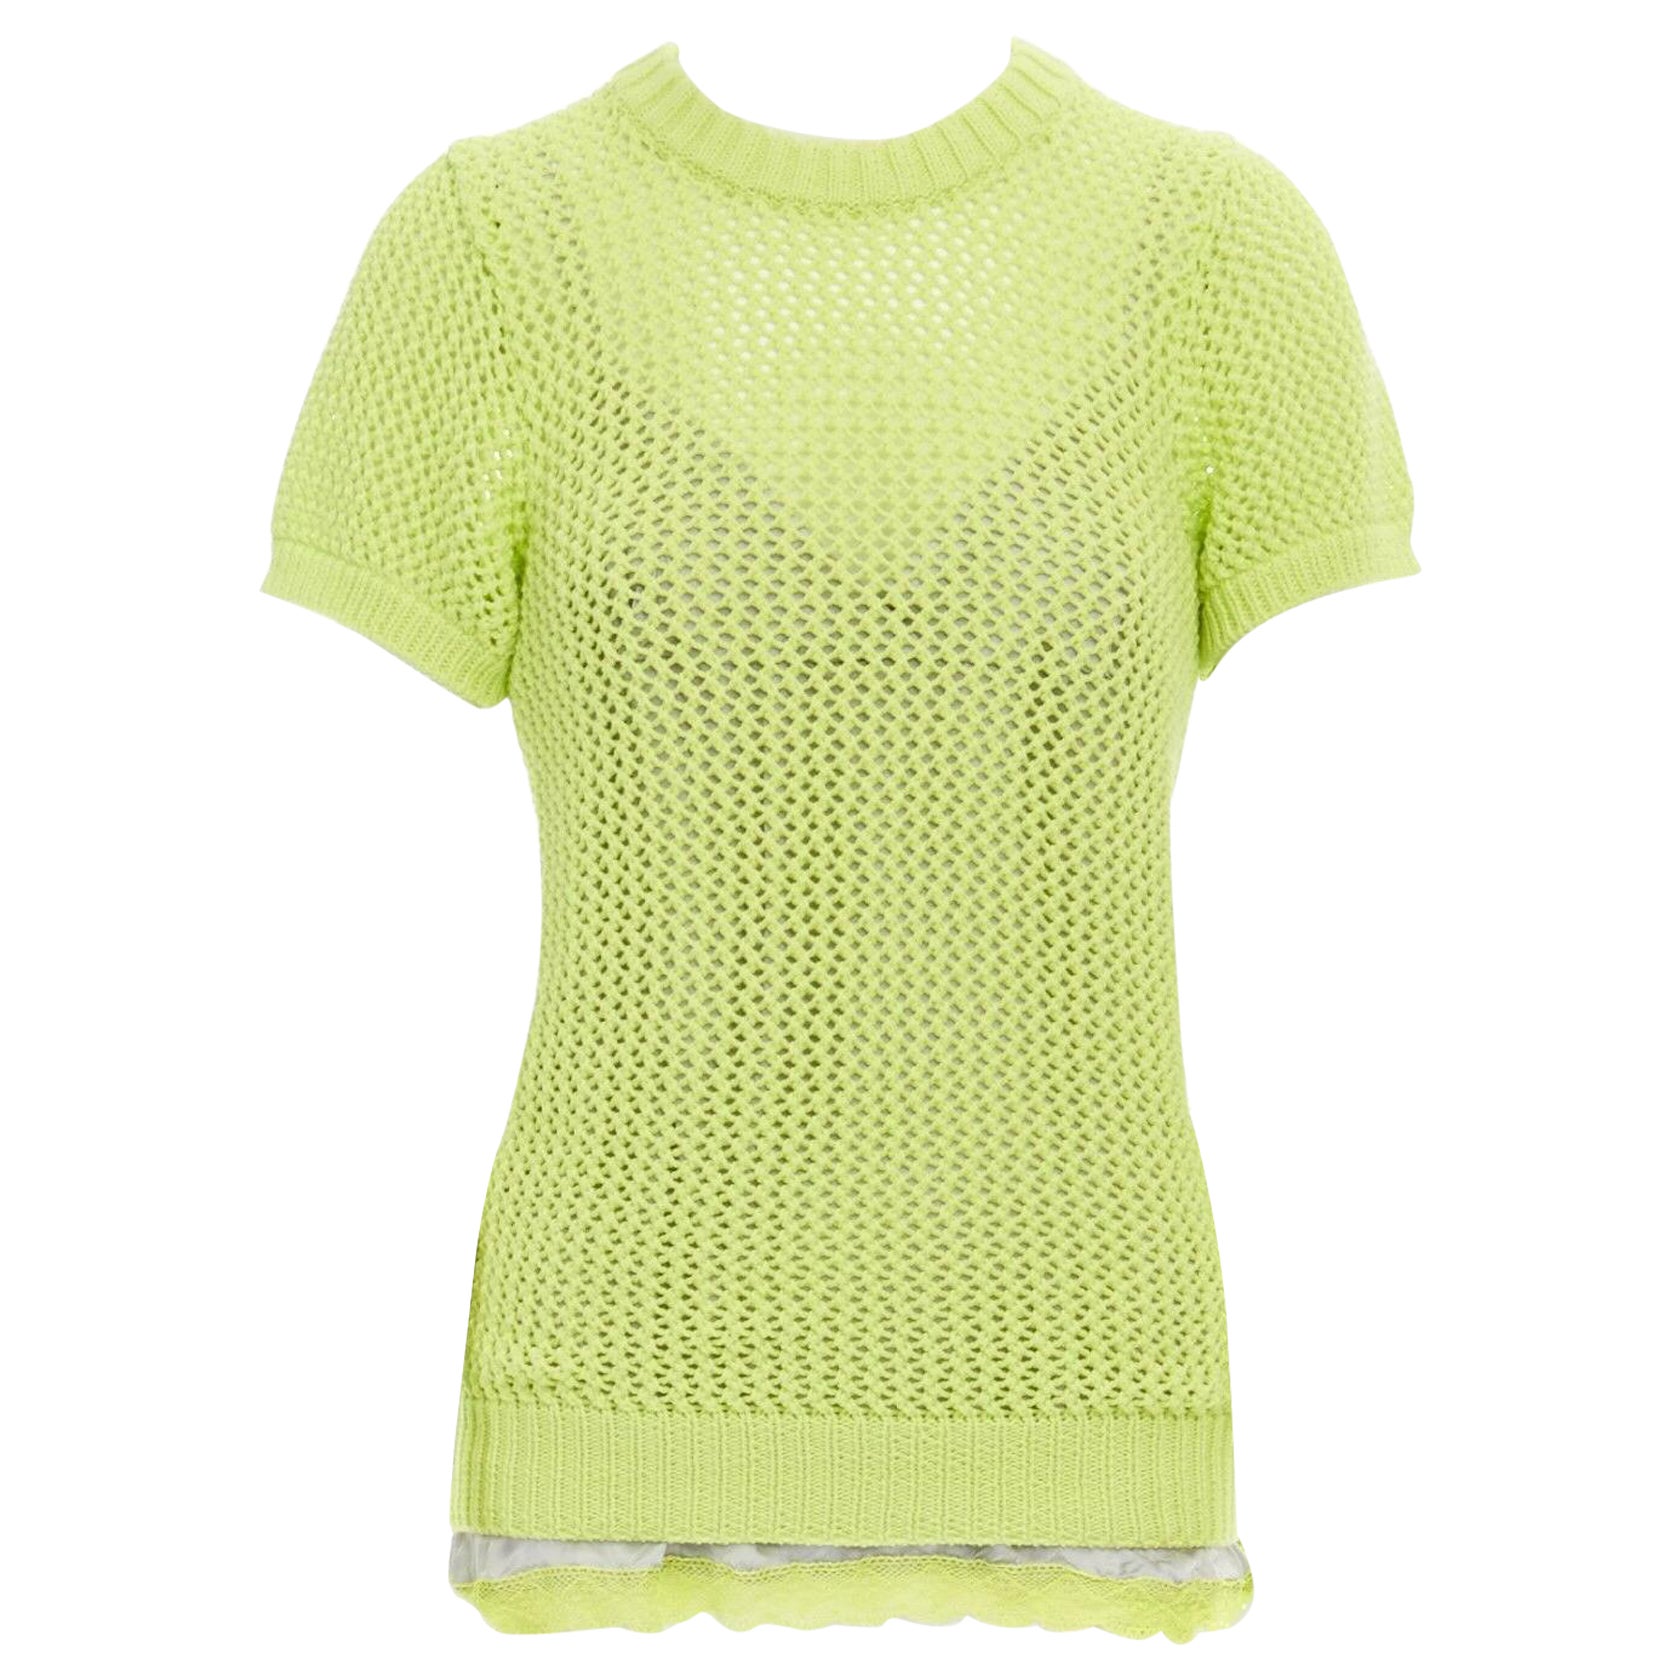 SACAI LUCK neon yellow grey lace trimmed camisole crochet knit sweater top JP3 L